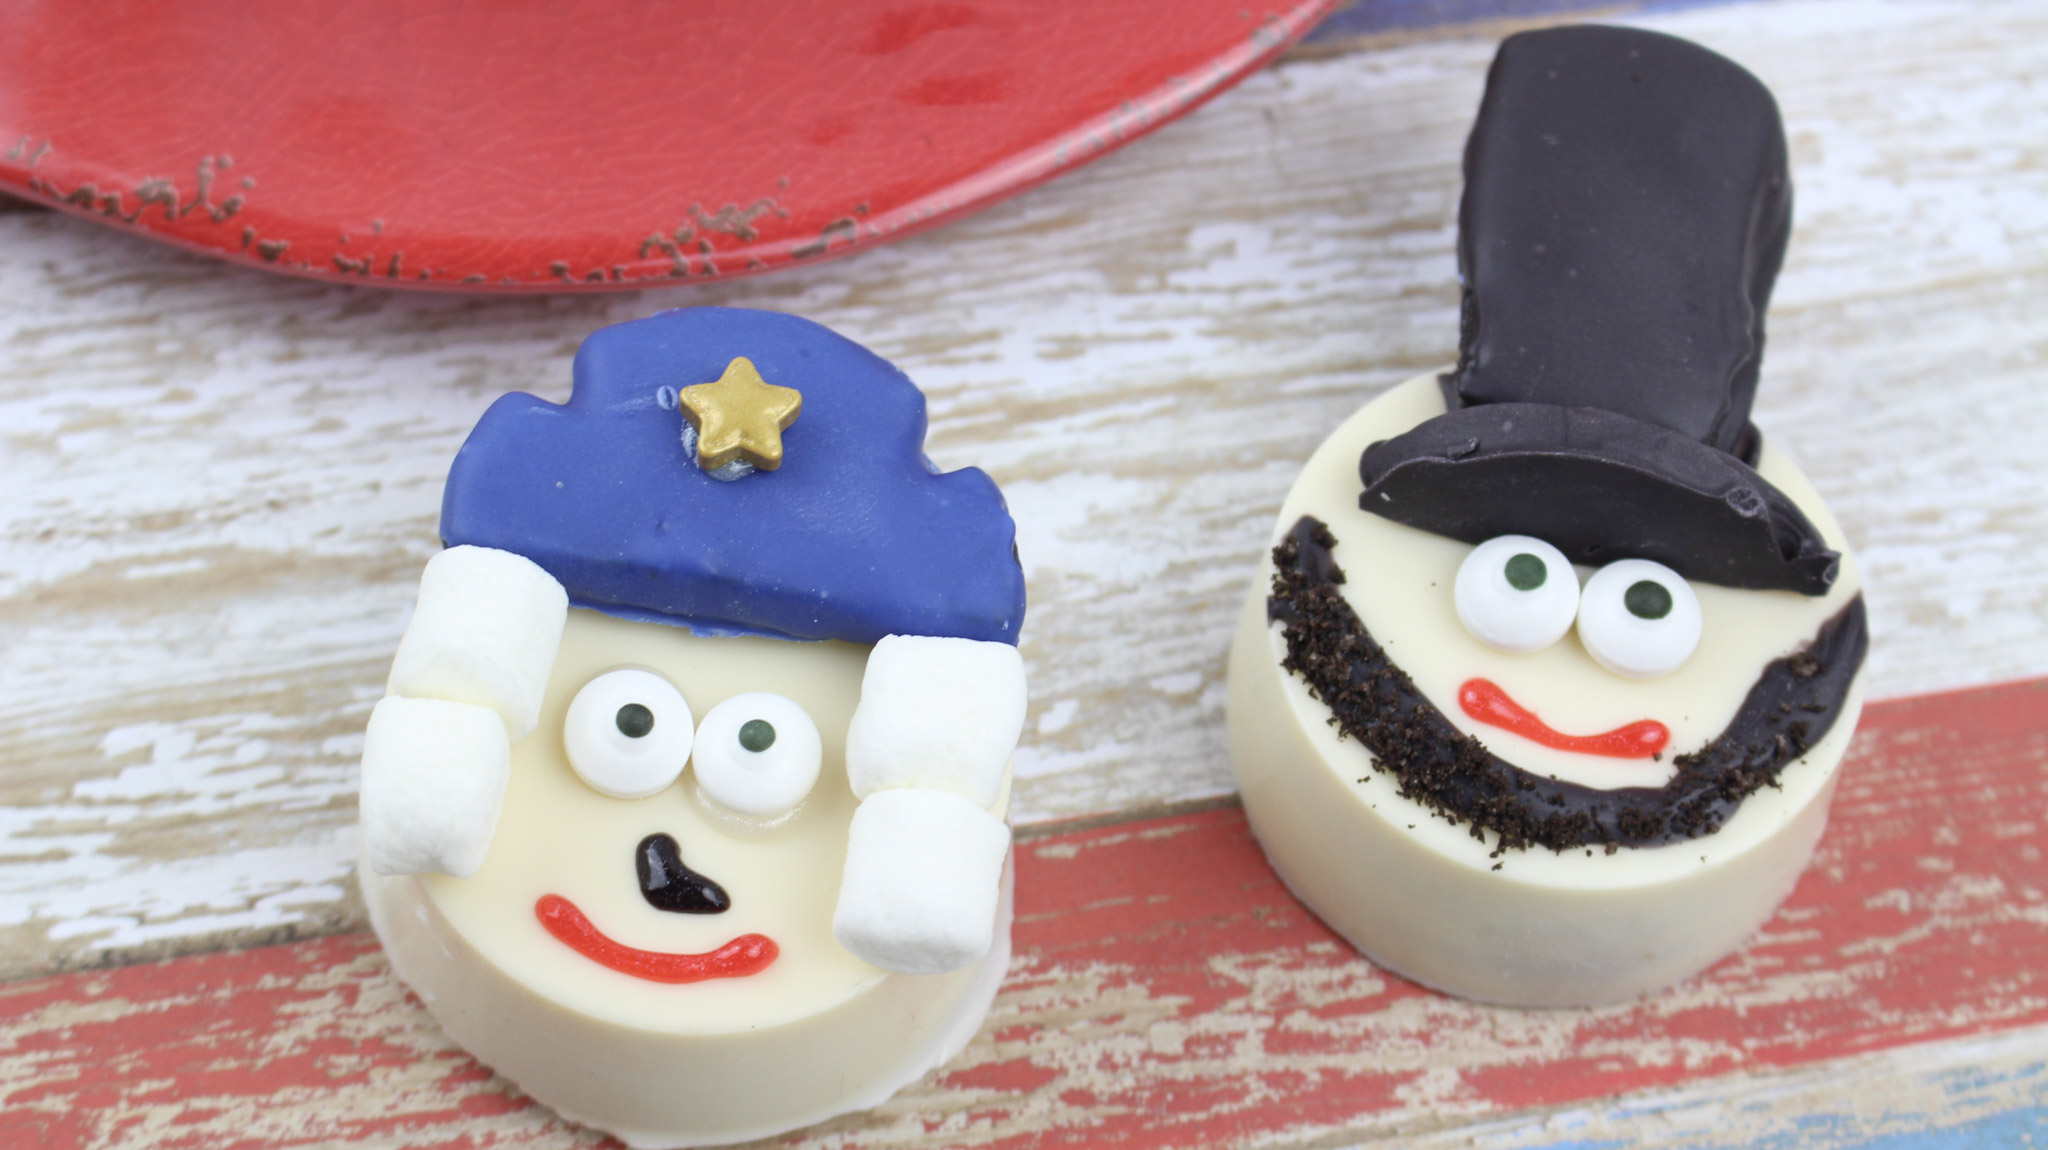 President's Day Cookies for Kids - George Washington & Abraham Lincoln